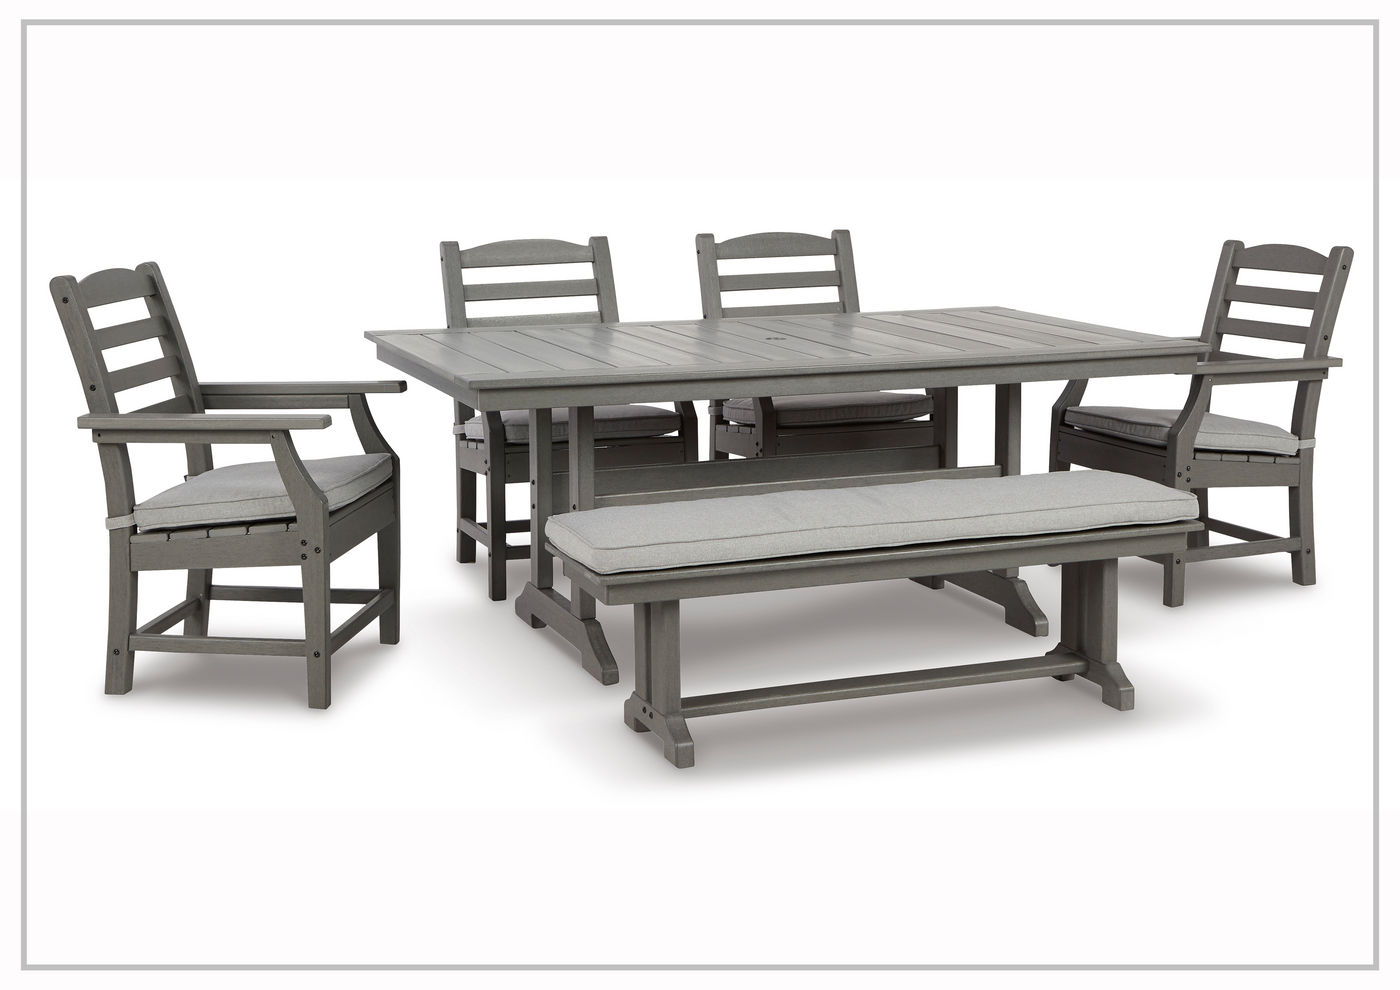 Vespera Vantage Outdoor 6-Piece Dining Set with Dining Table, 4 Chairs and Bench